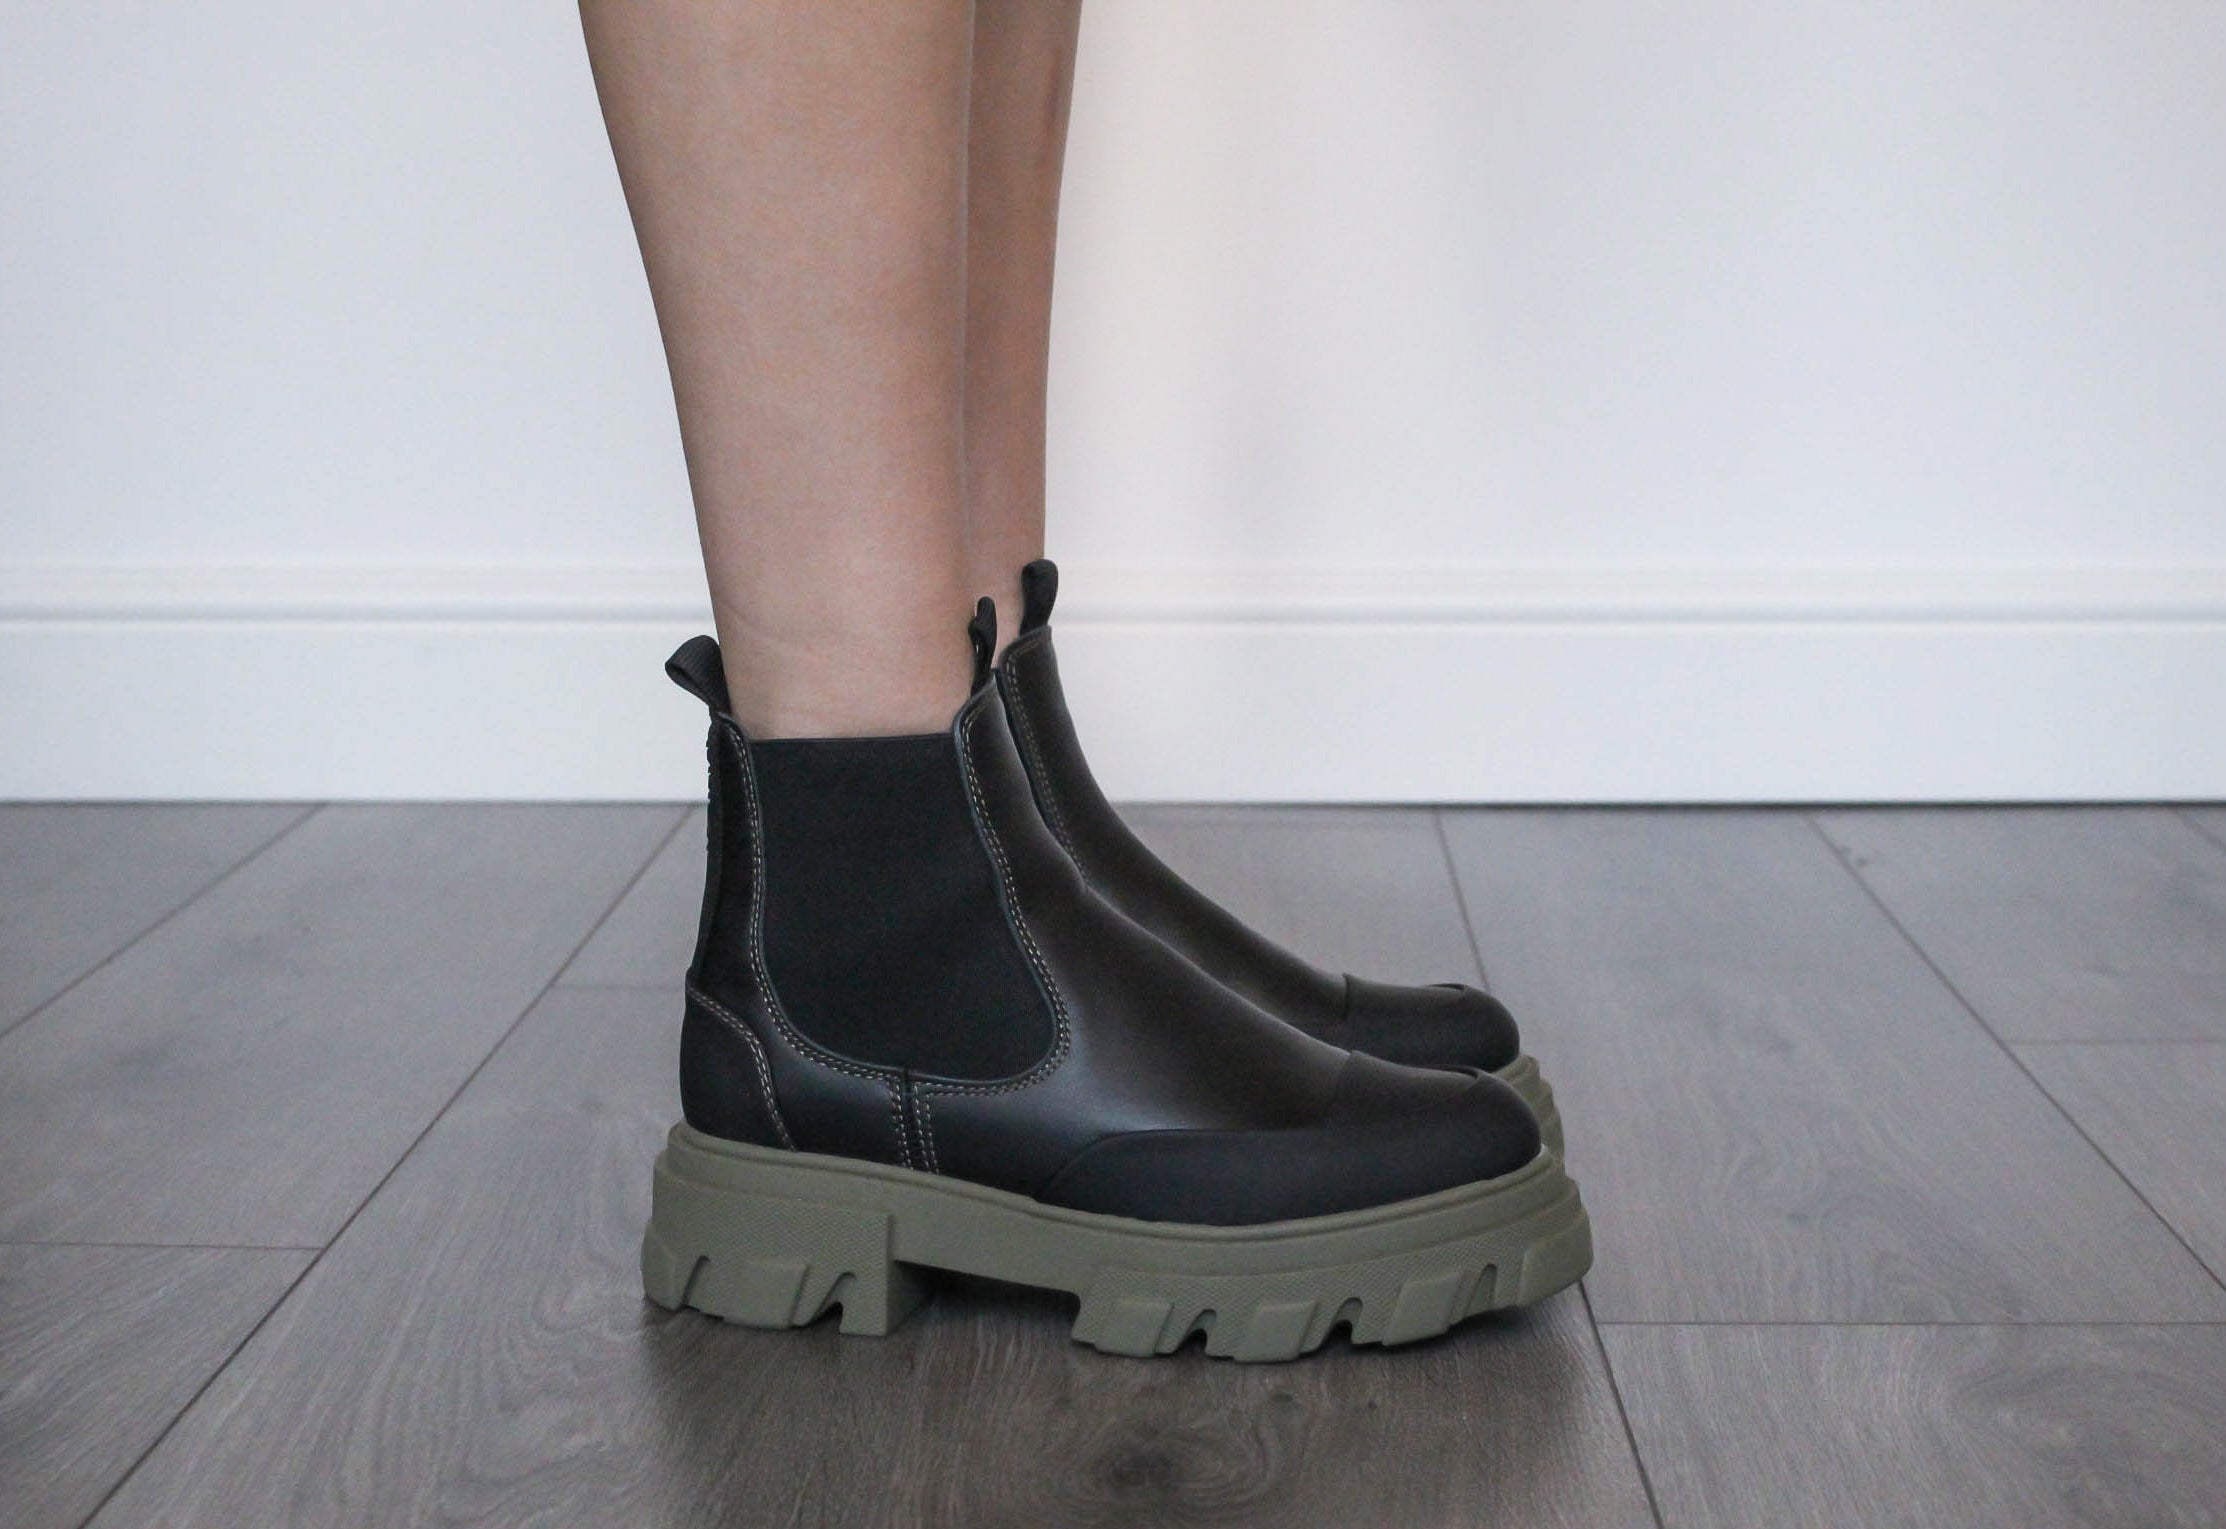 GANNI S1629 Leather Chelsea Boots in Black and Green